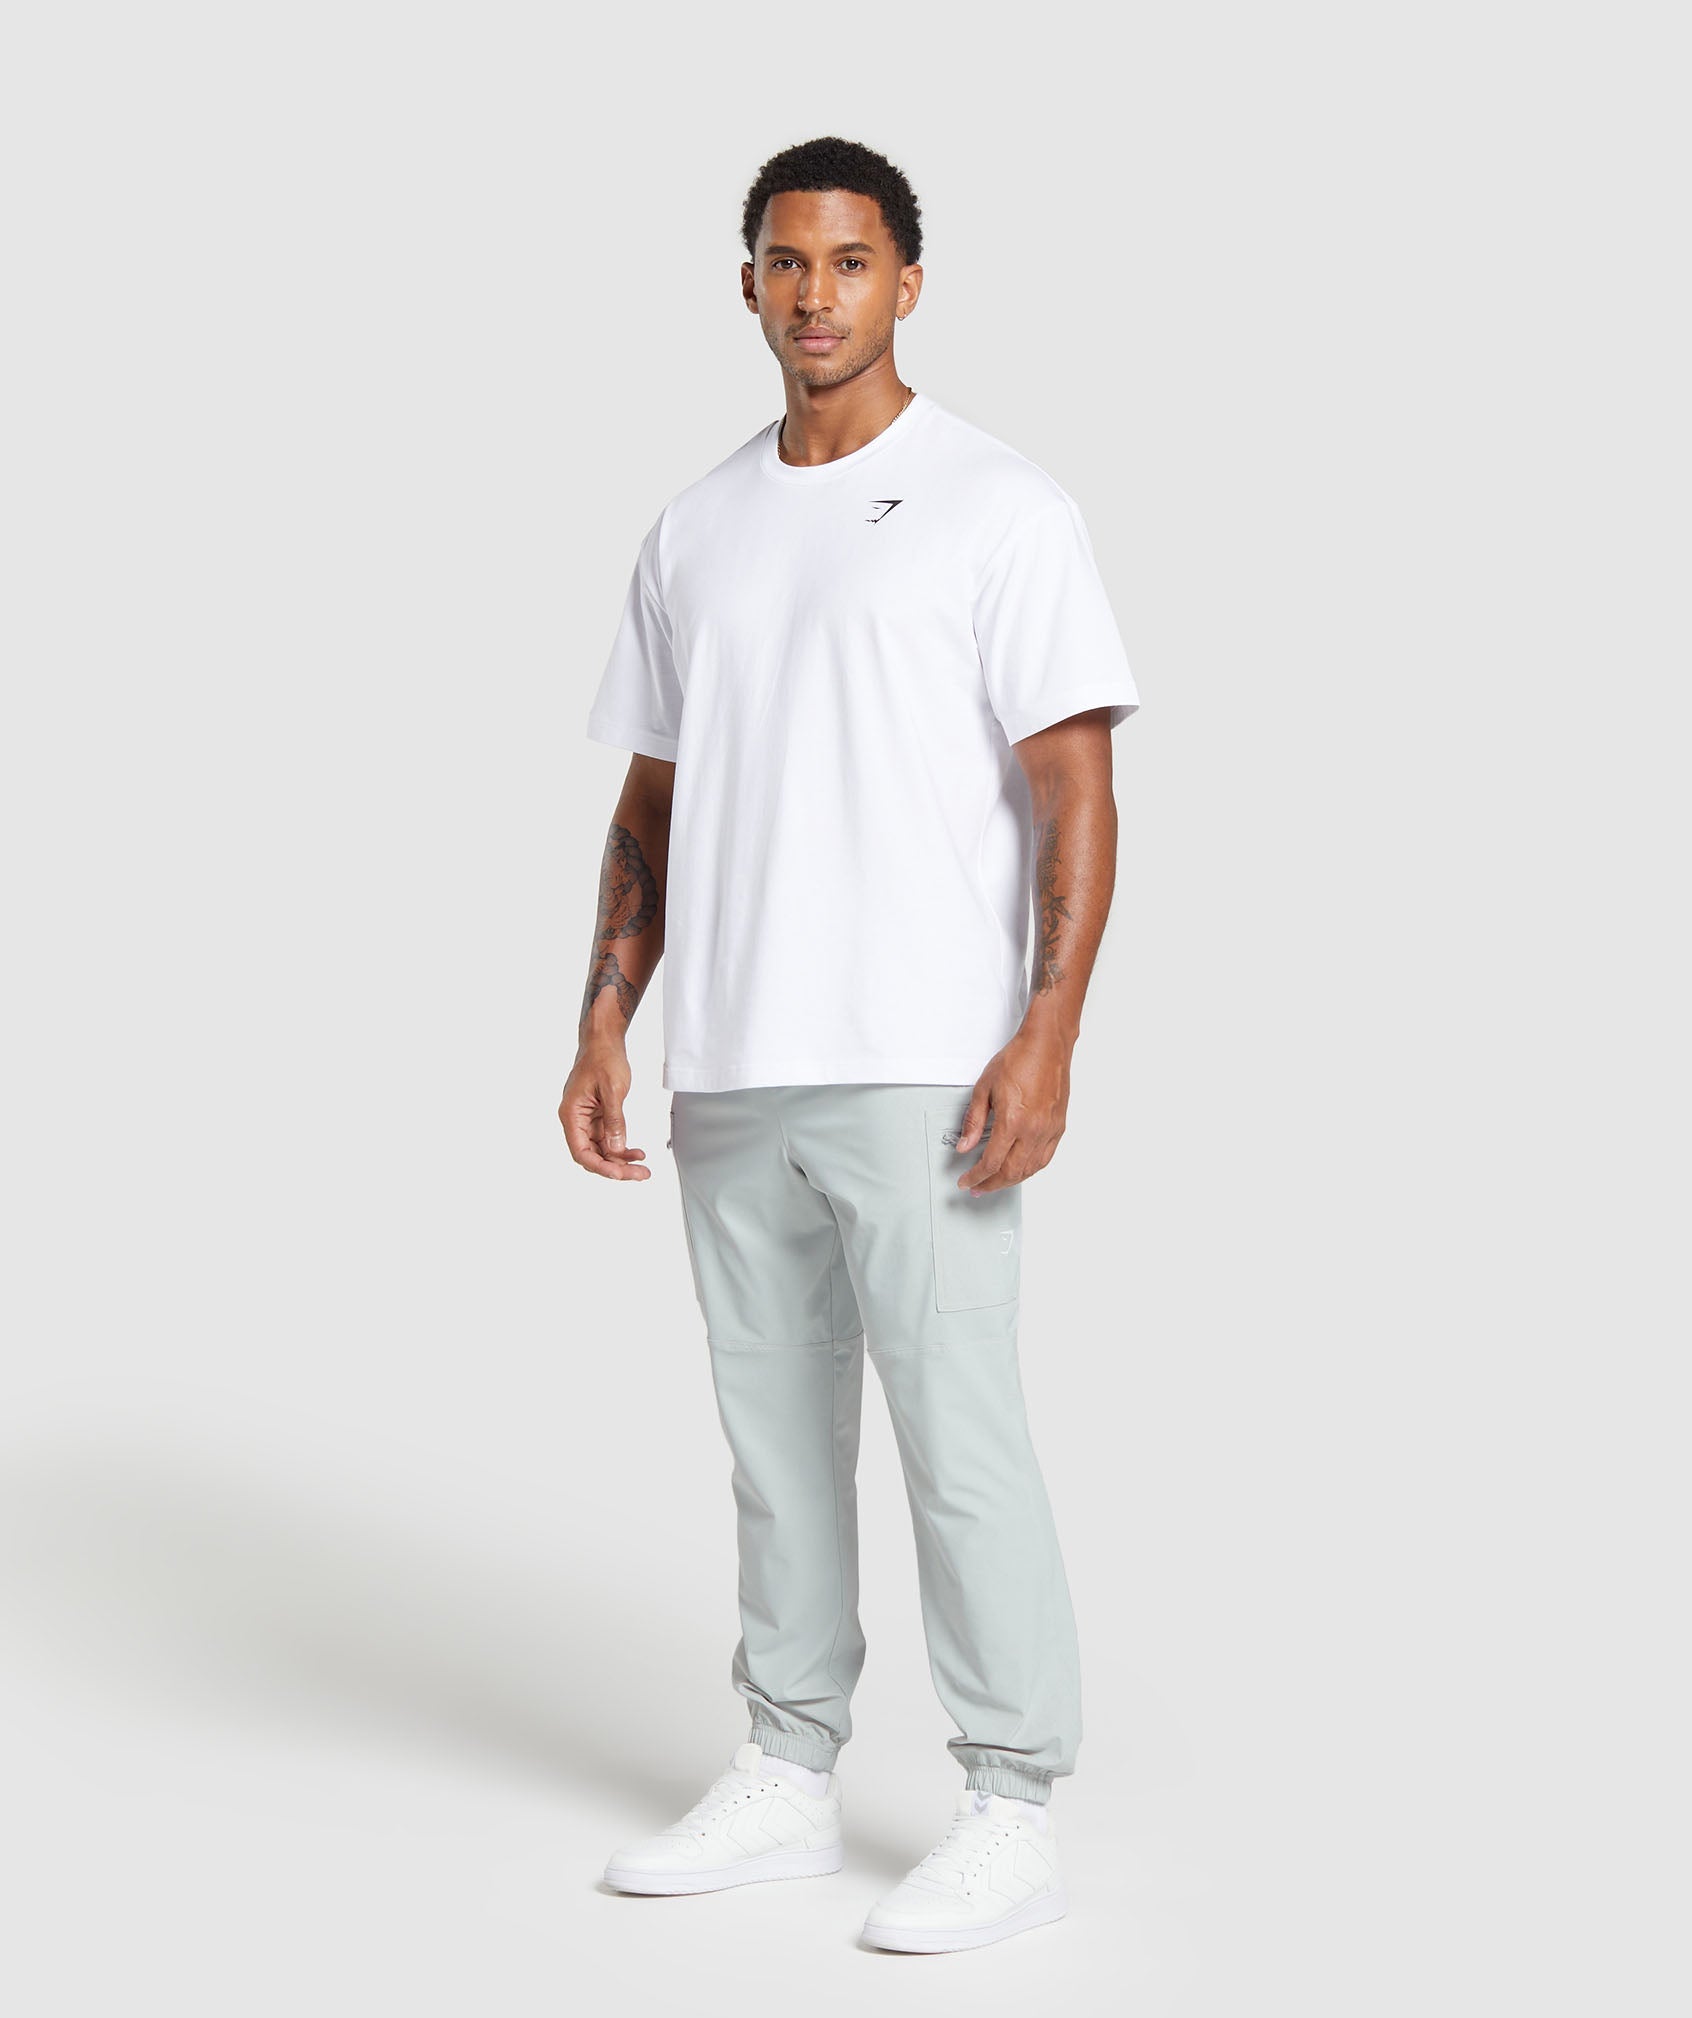 Rest Day Cargo Pants in Light Grey - view 4